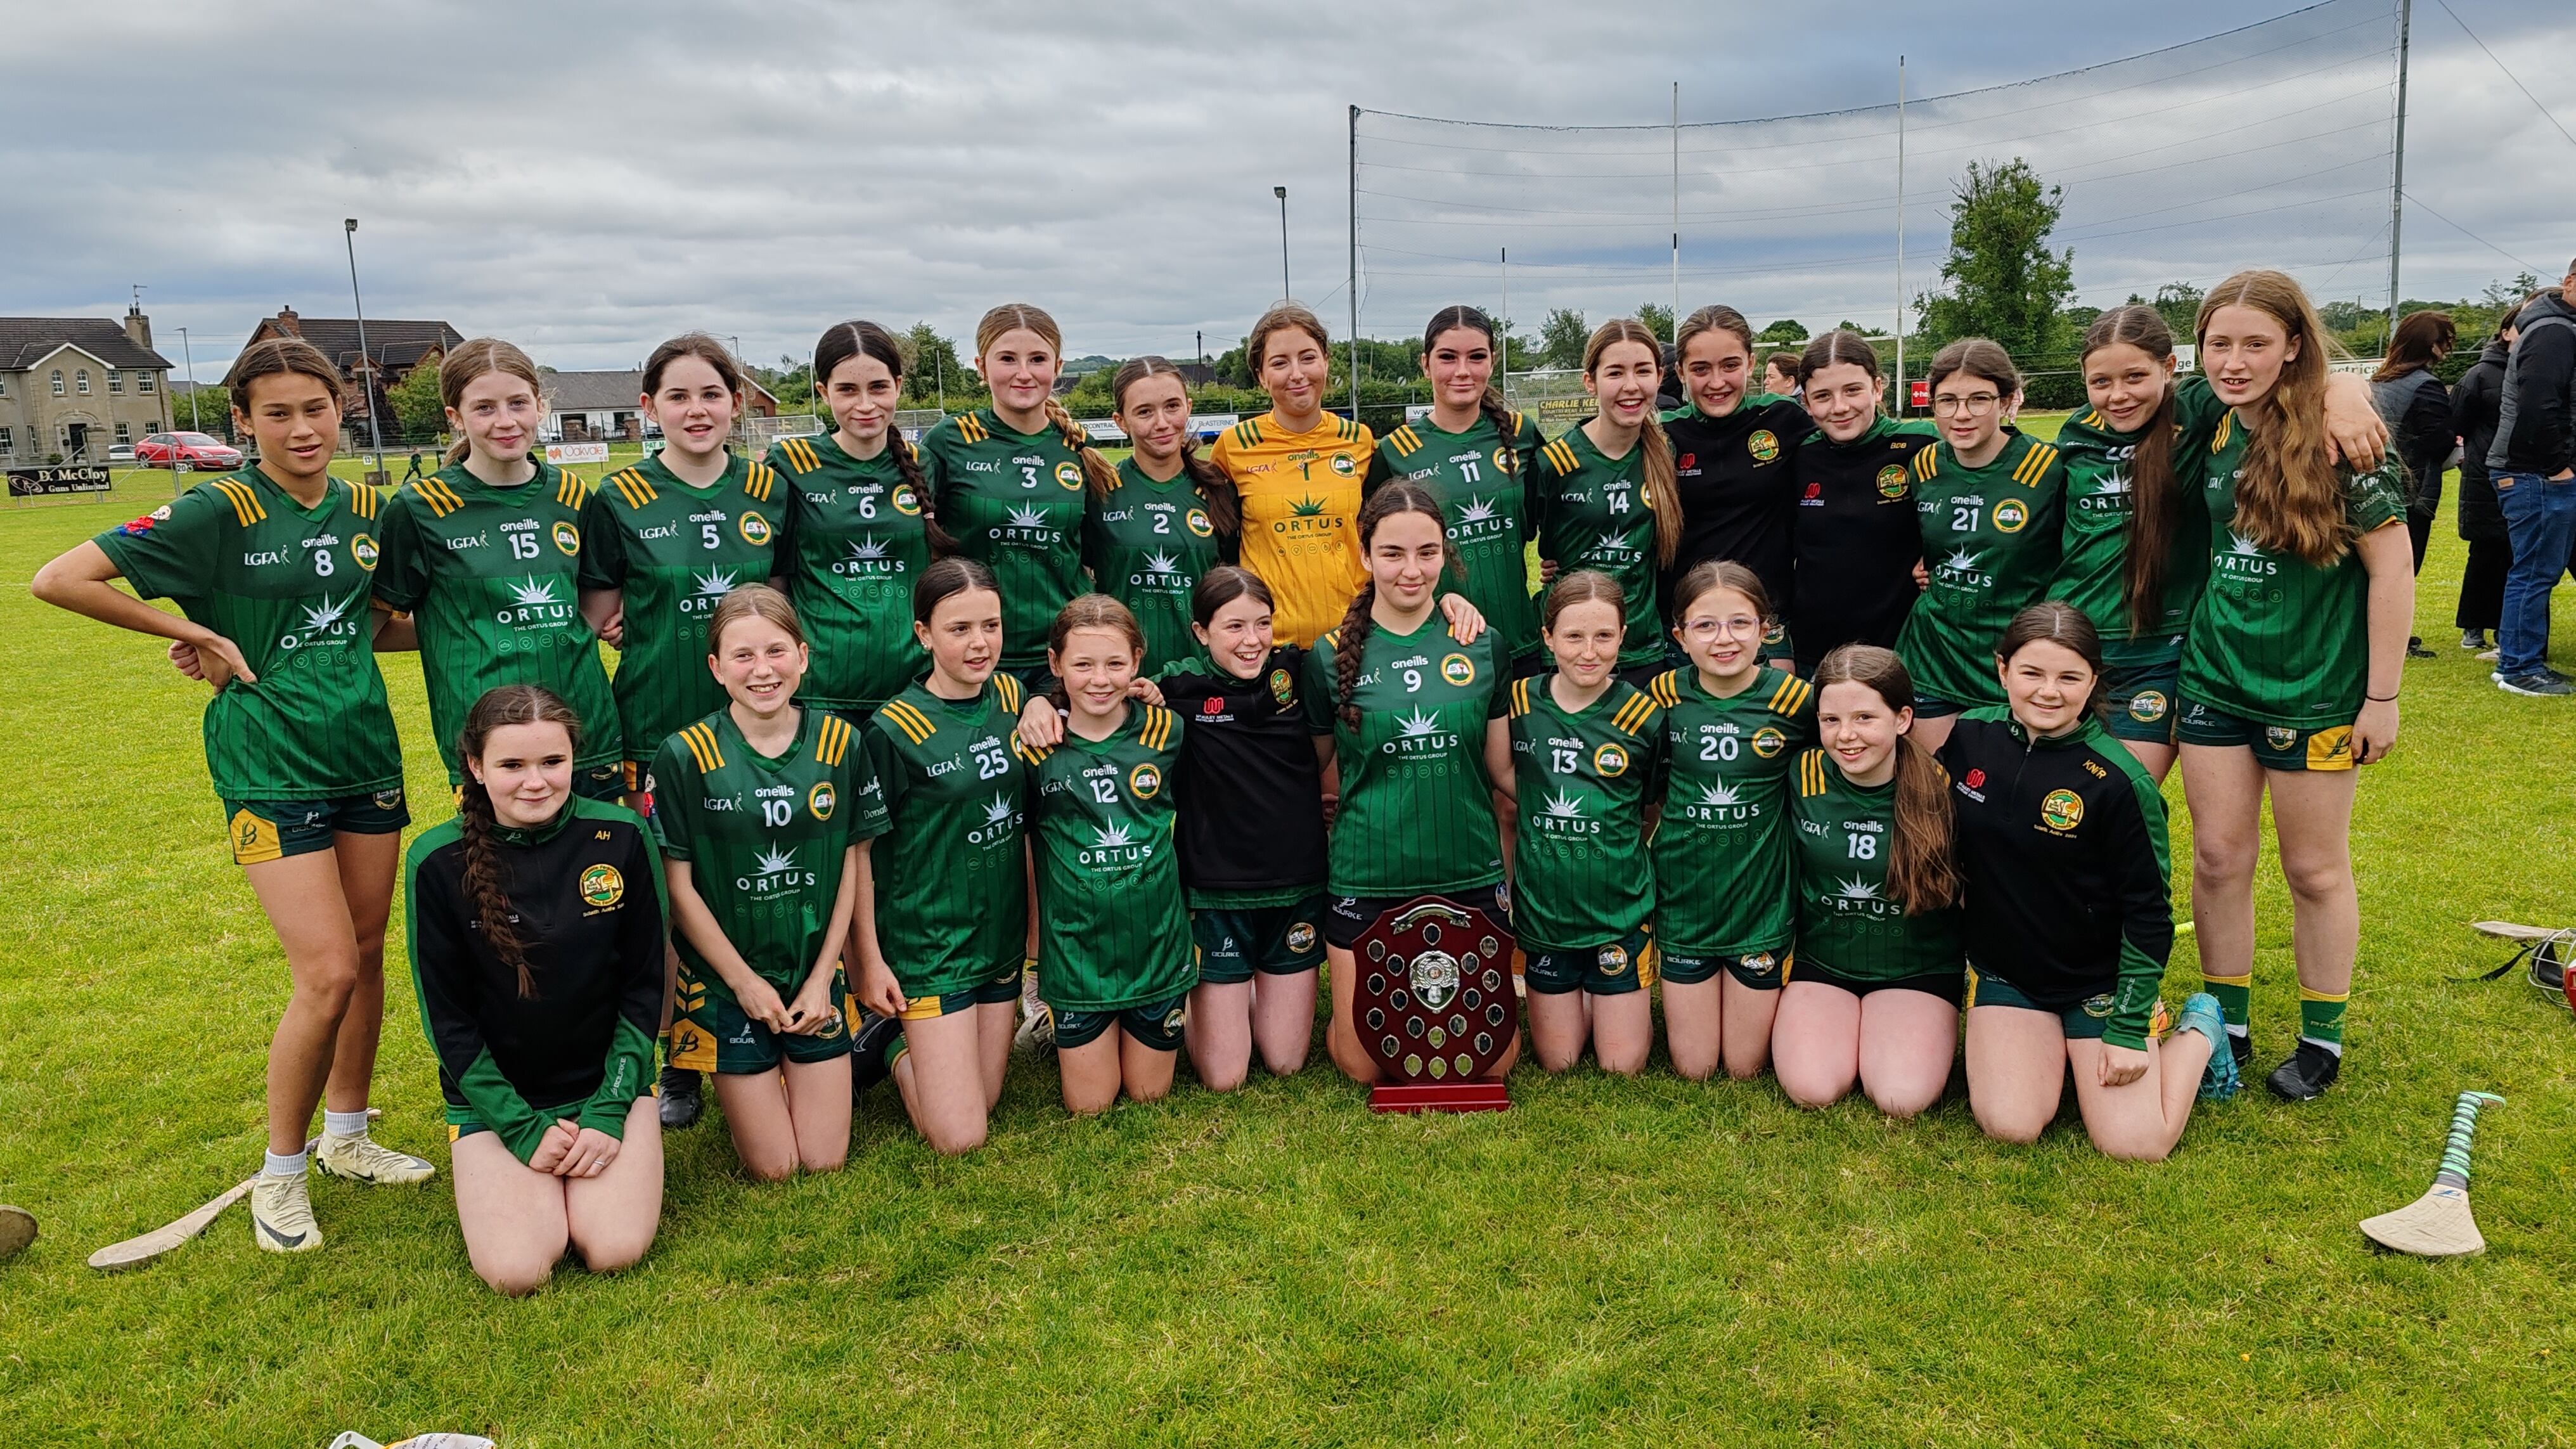 The victorious Coláiste Feirste team with the Sciath Aoife trophy